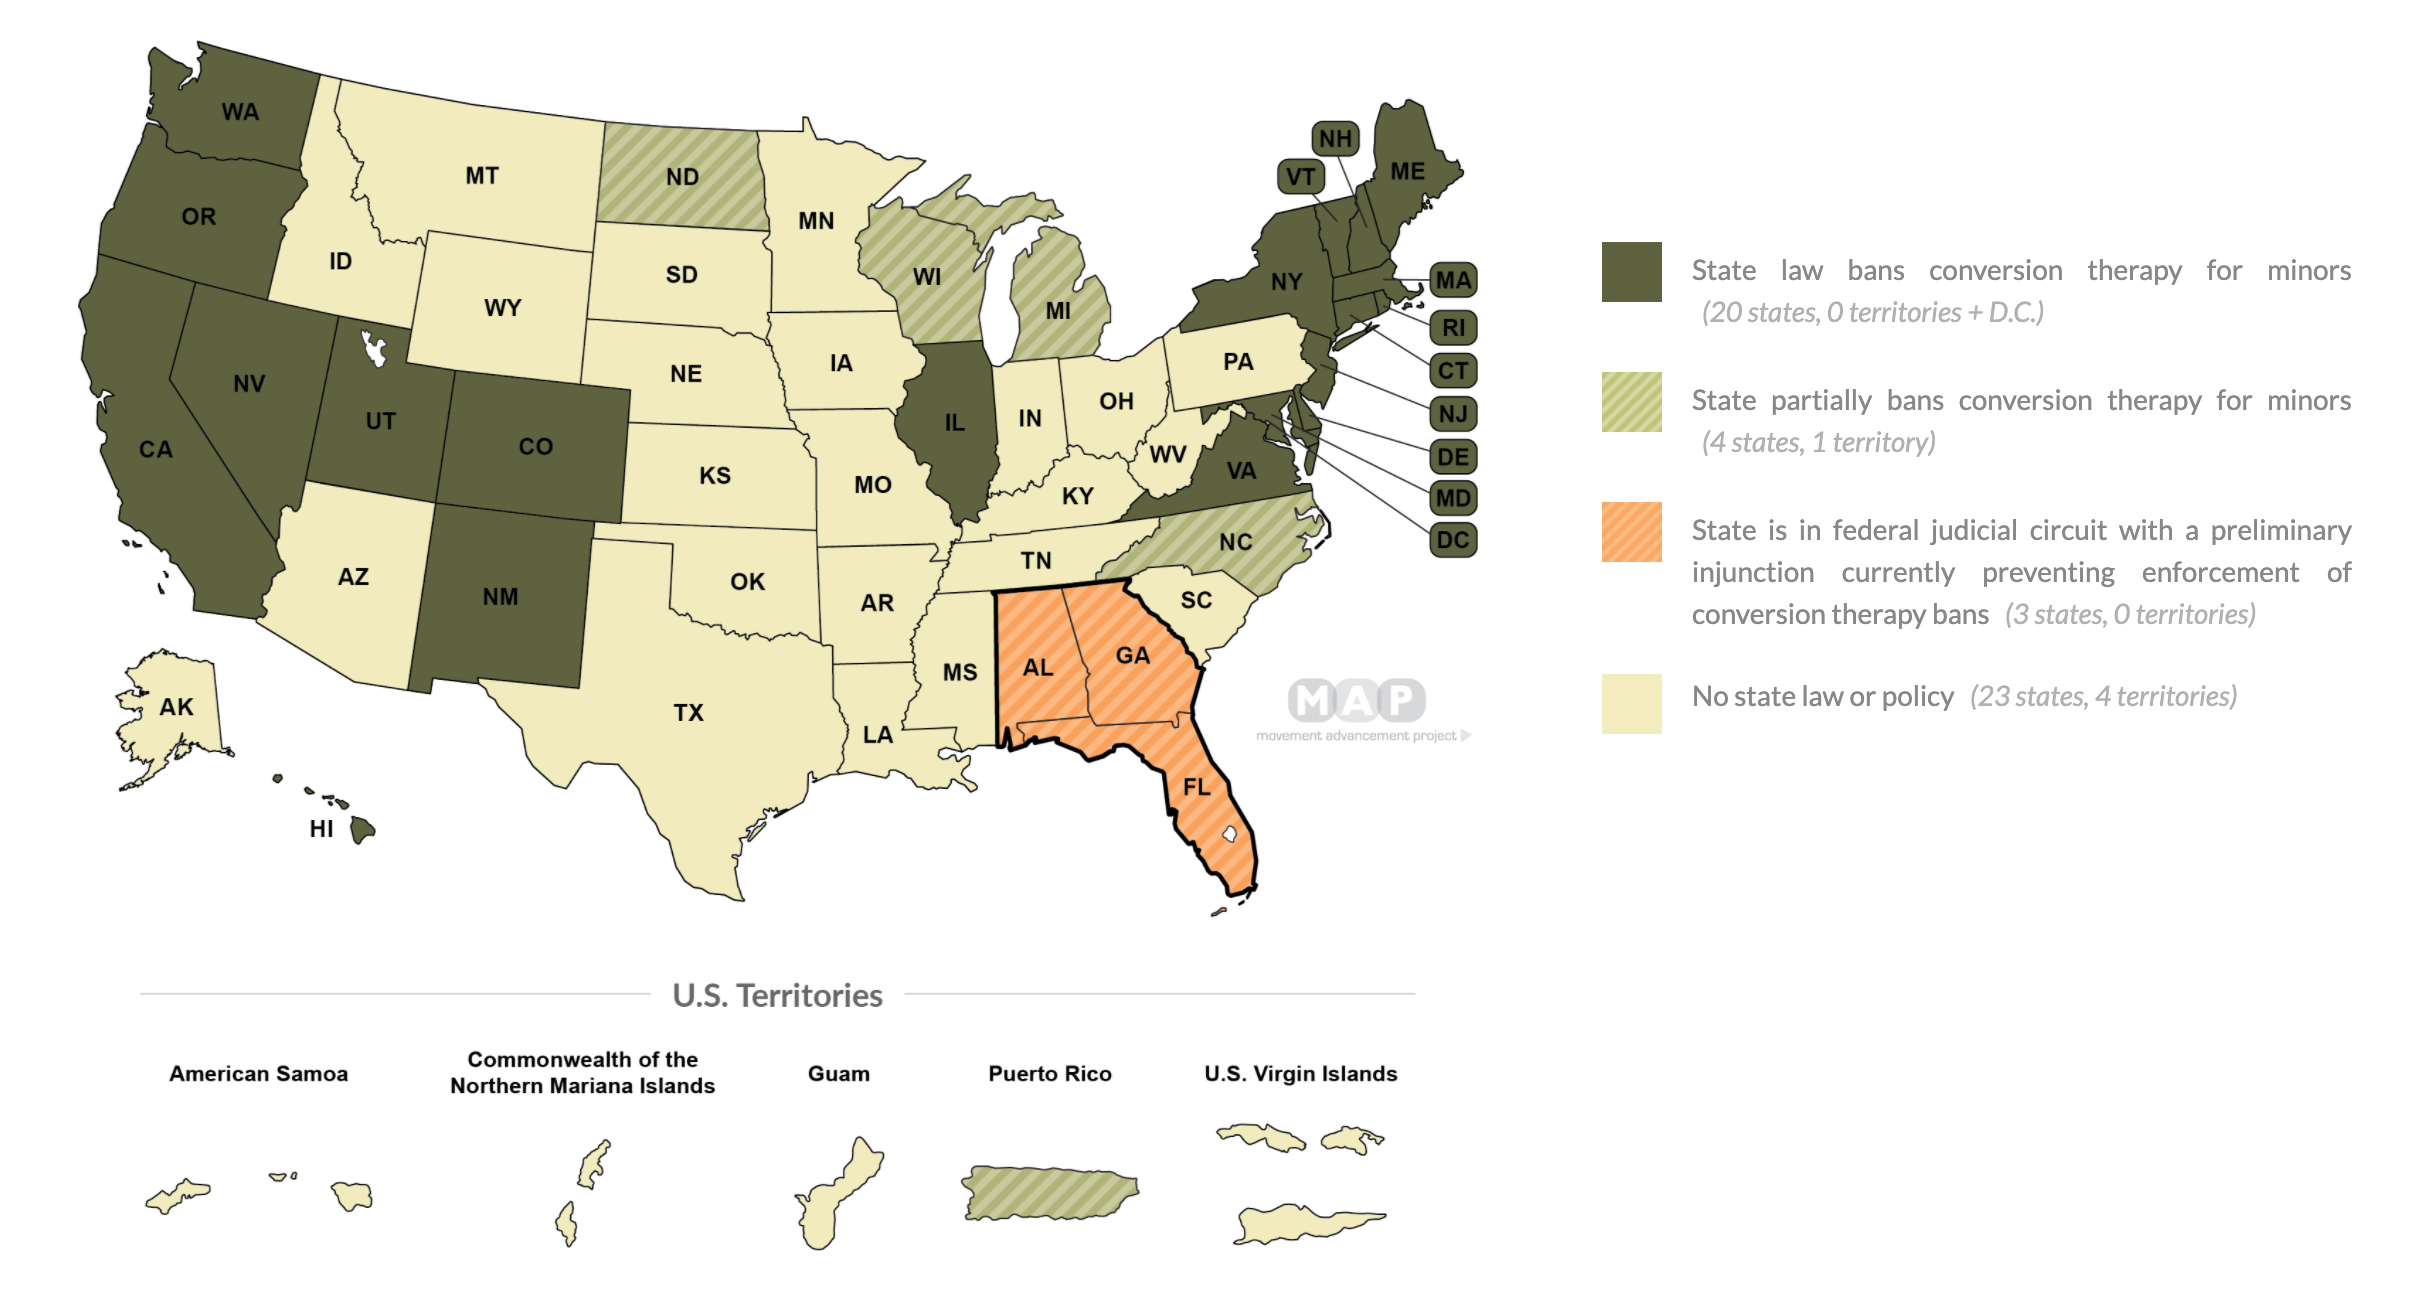 A map showing conversion therapy bans in the US.